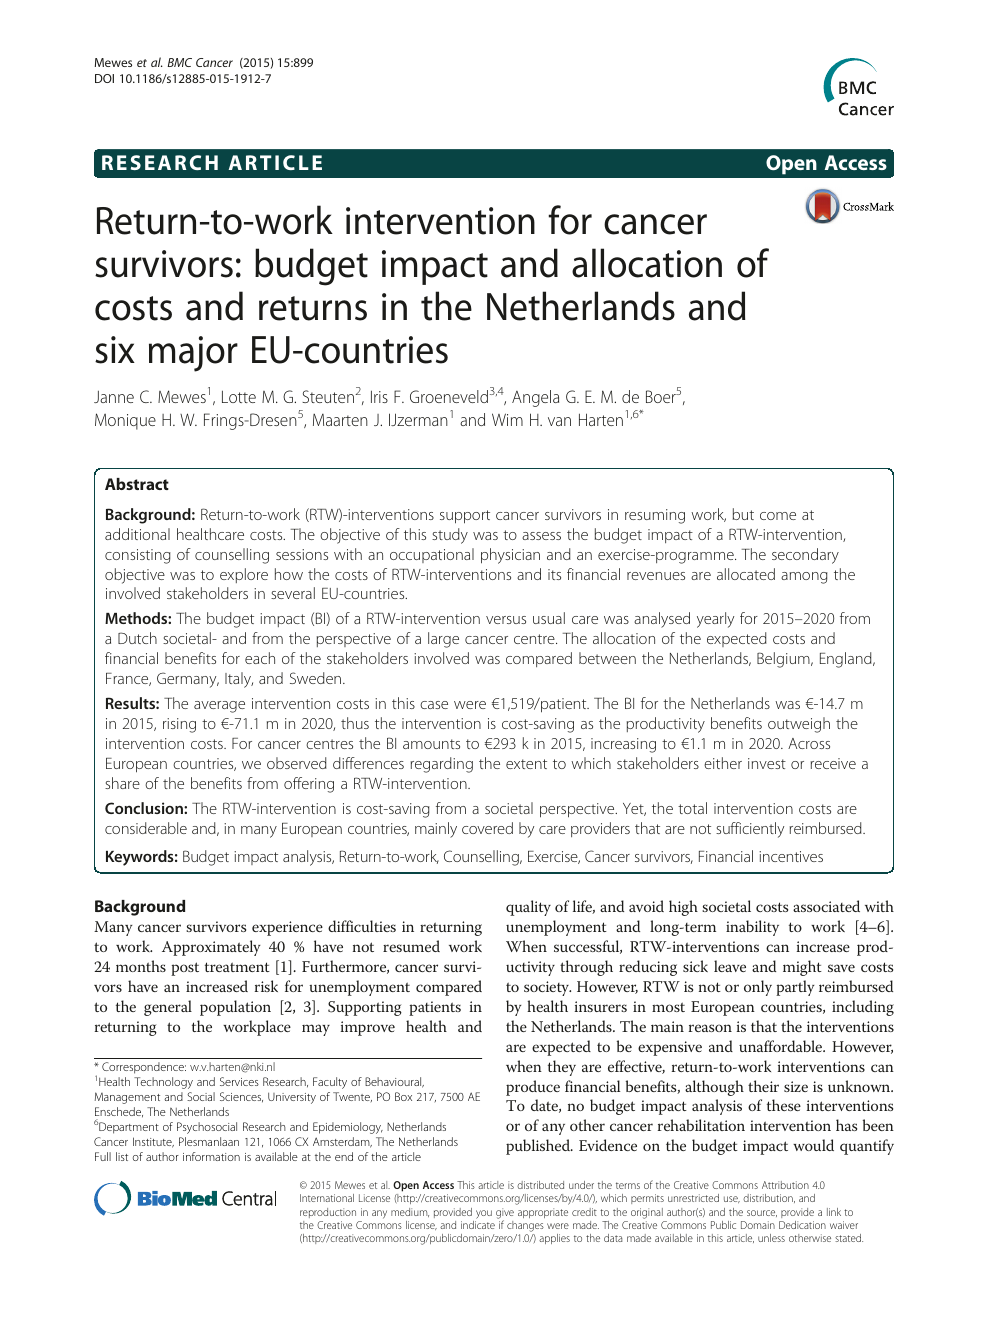 Return To Work Intervention For Cancer Survivors Budget Impact And Allocation Of Costs And Returns In The Netherlands And Six Major Eu Countries Topic Of Research Paper In Economics And Business Download Scholarly Article